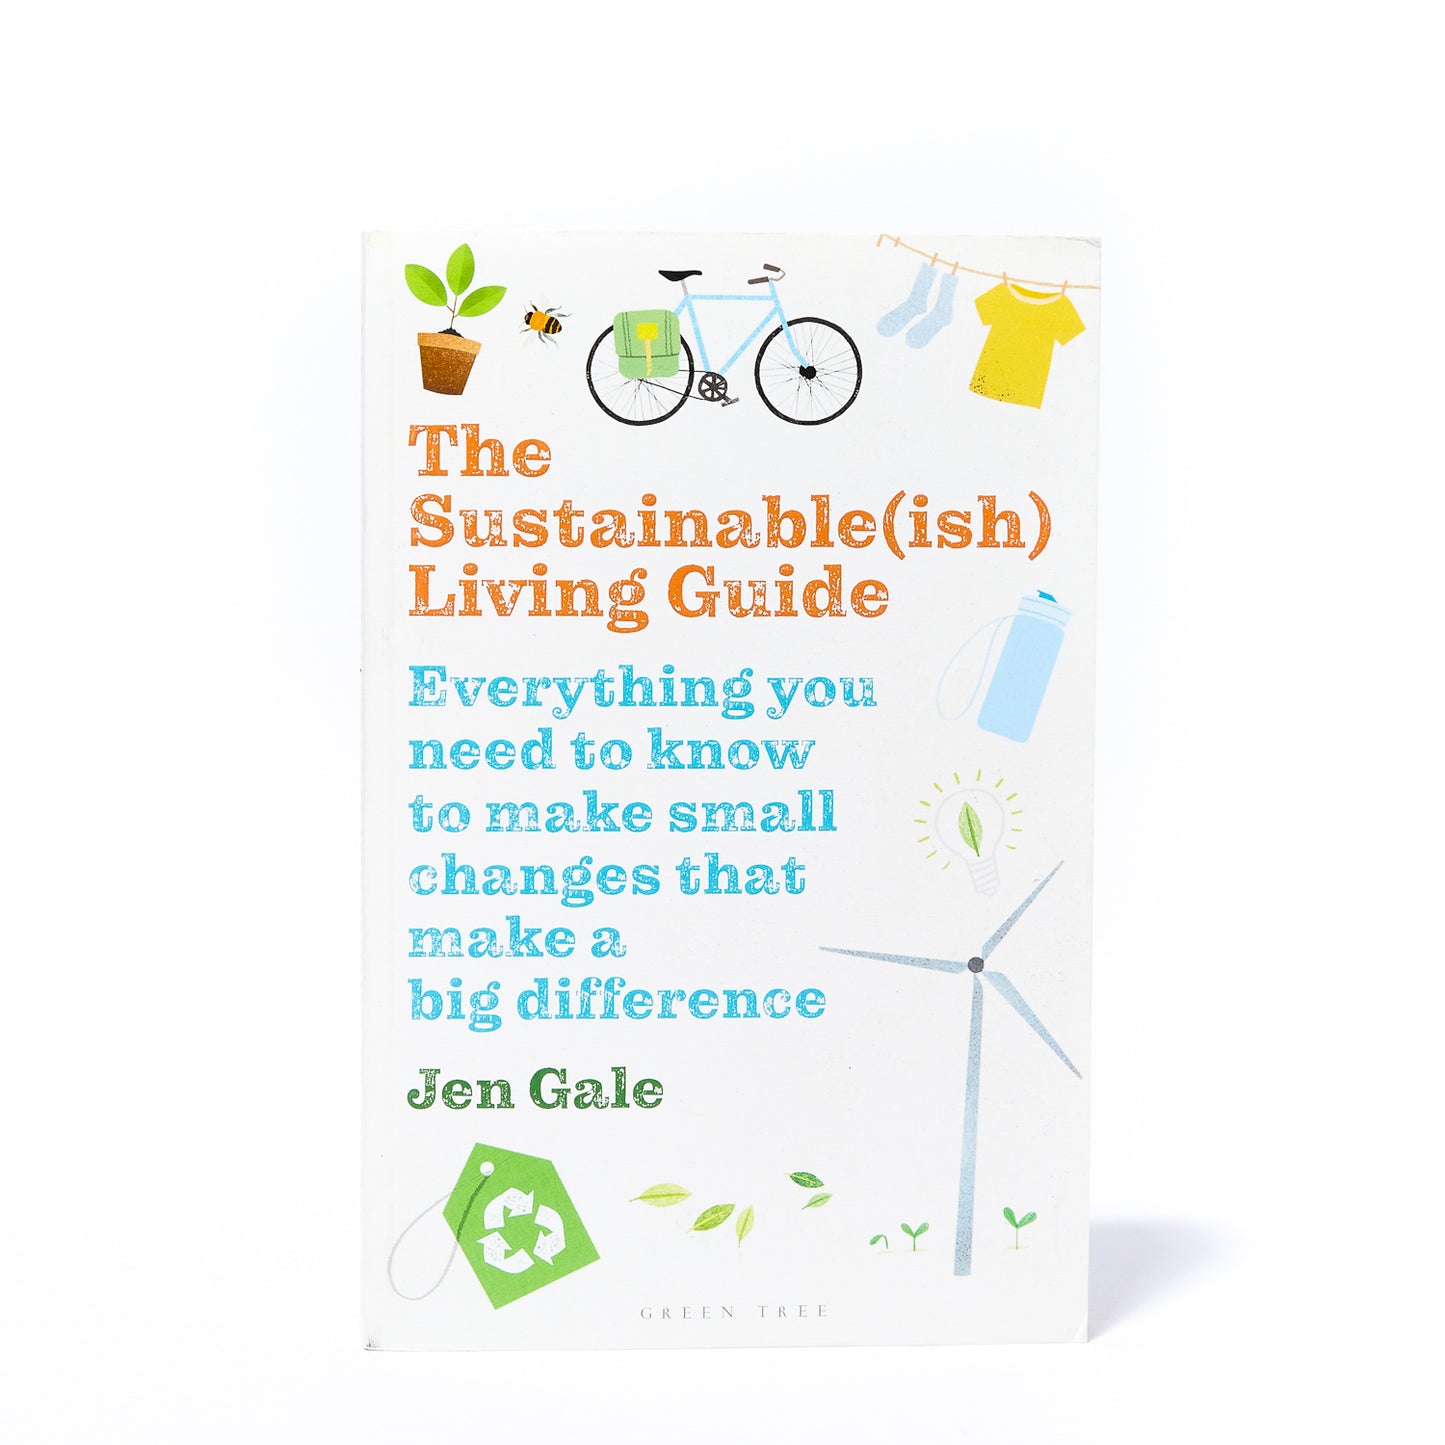 THE SUSTAINABLE (ISH) LIVING GUIDE